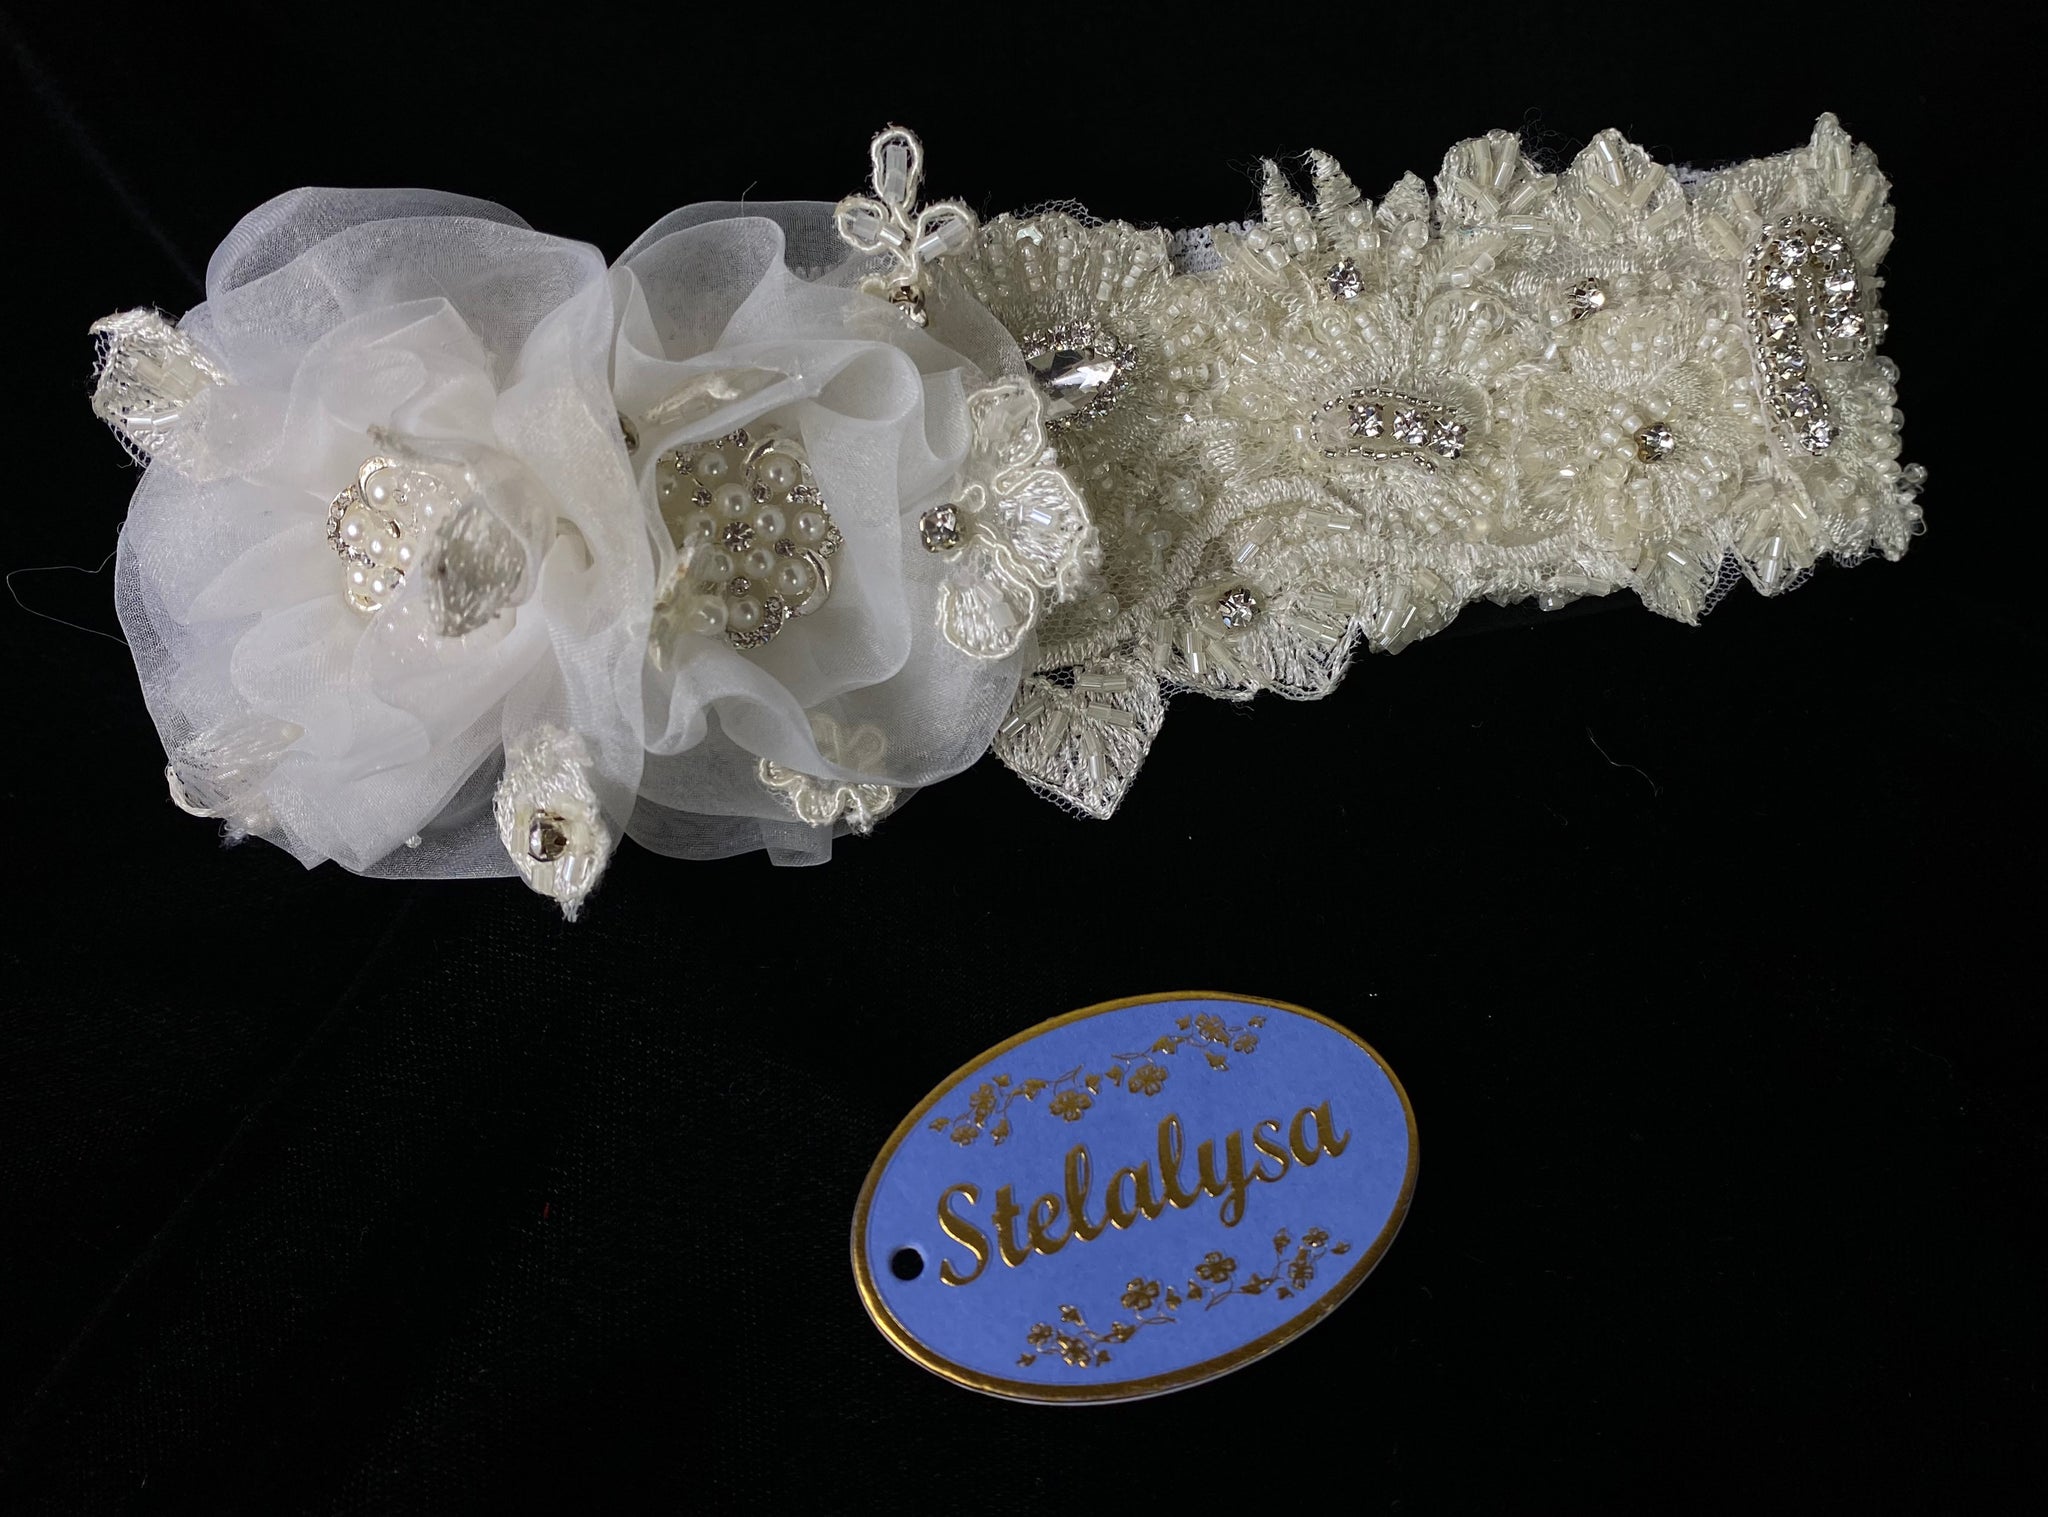 Baptism Headwrap  This is an elegant handmade and one of a kind ivory & white headwrap with tulle flower on lace, pearls and rhinestones.  Headwrap is made of soft cotton lace elastic.  Your baby will look like the little princess she is with this headwrap on her special day!  